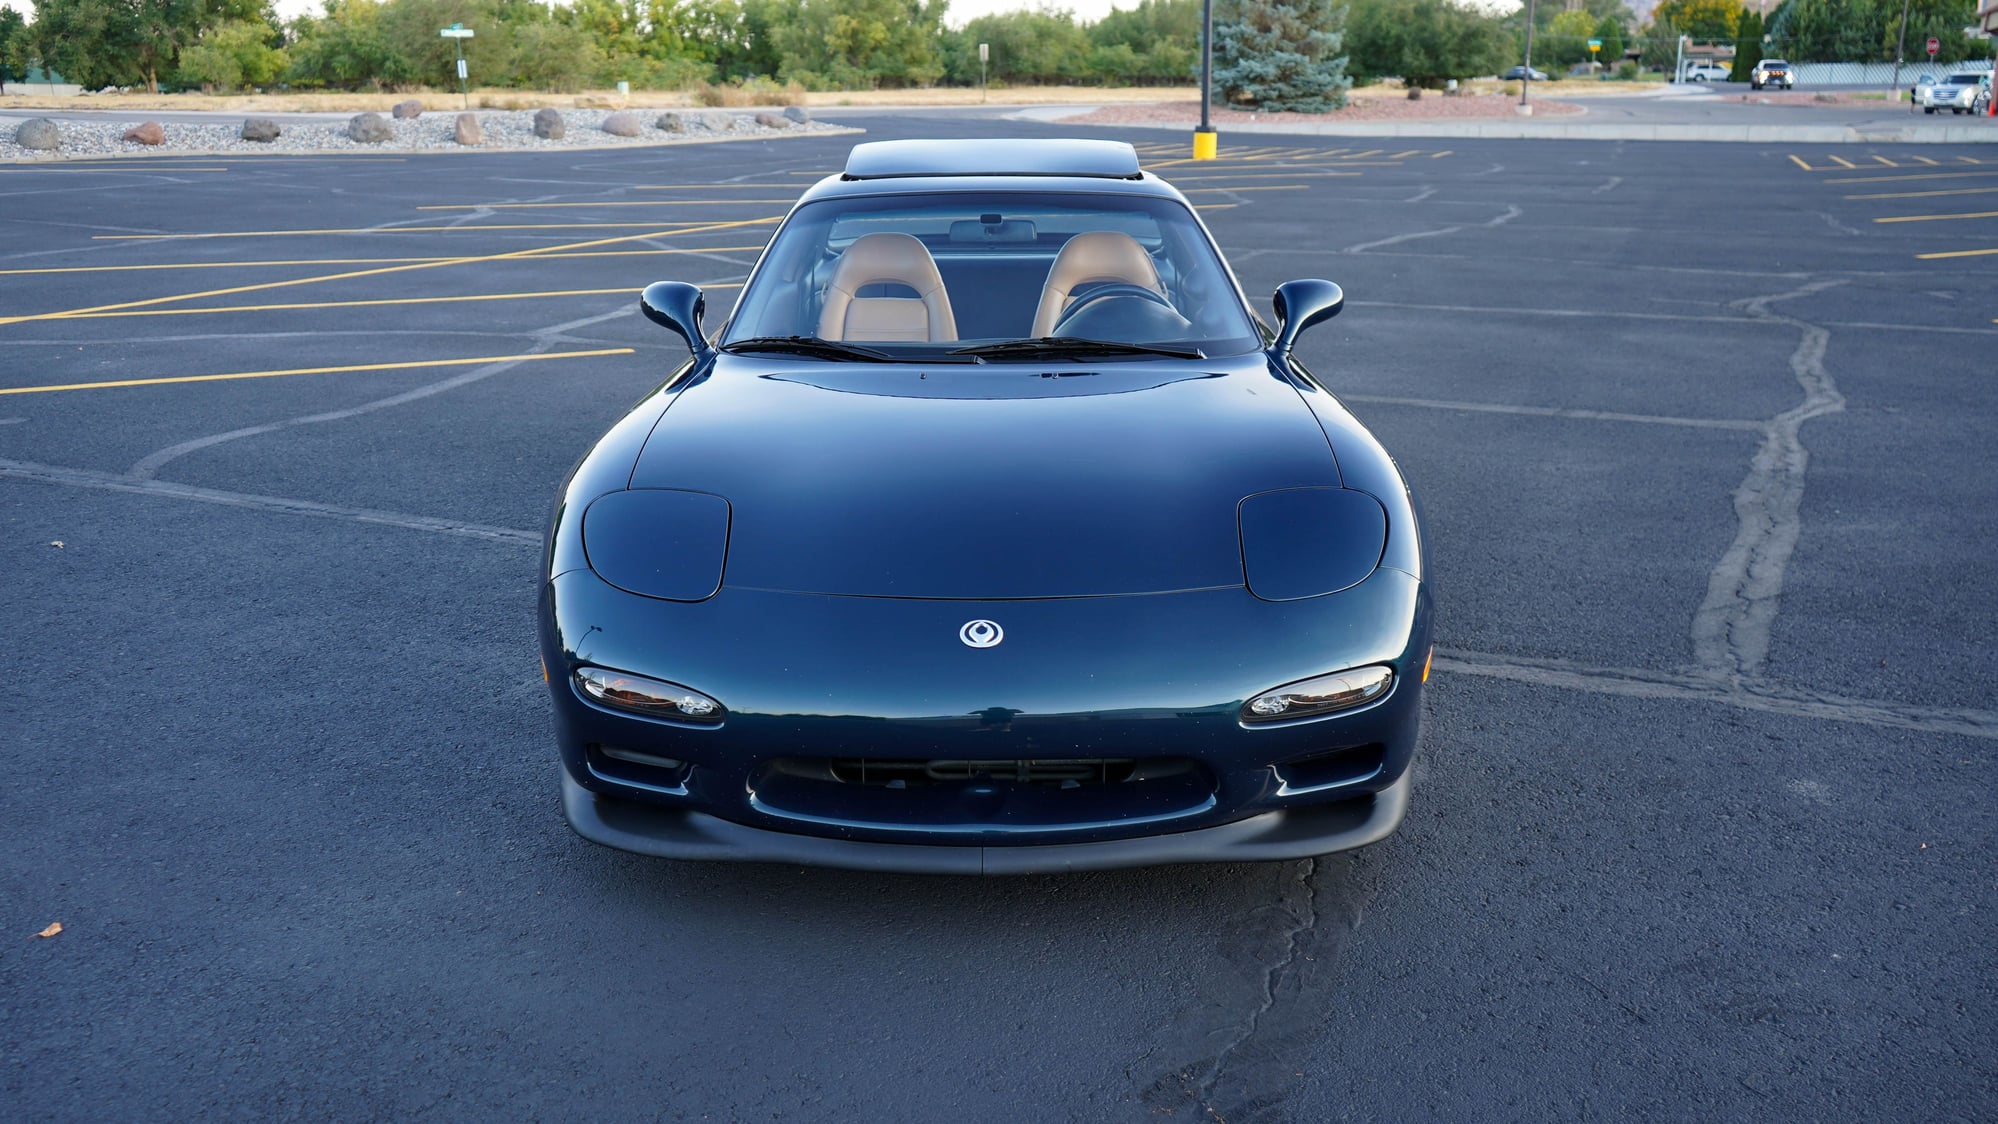 1994 Mazda RX-7 - 1994 Mazda RX-7 - Used - VIN JM1FD3334R030276 - 63,500 Miles - 2WD - Manual - Coupe - Blue - Grand Junction, CO 81507, United States